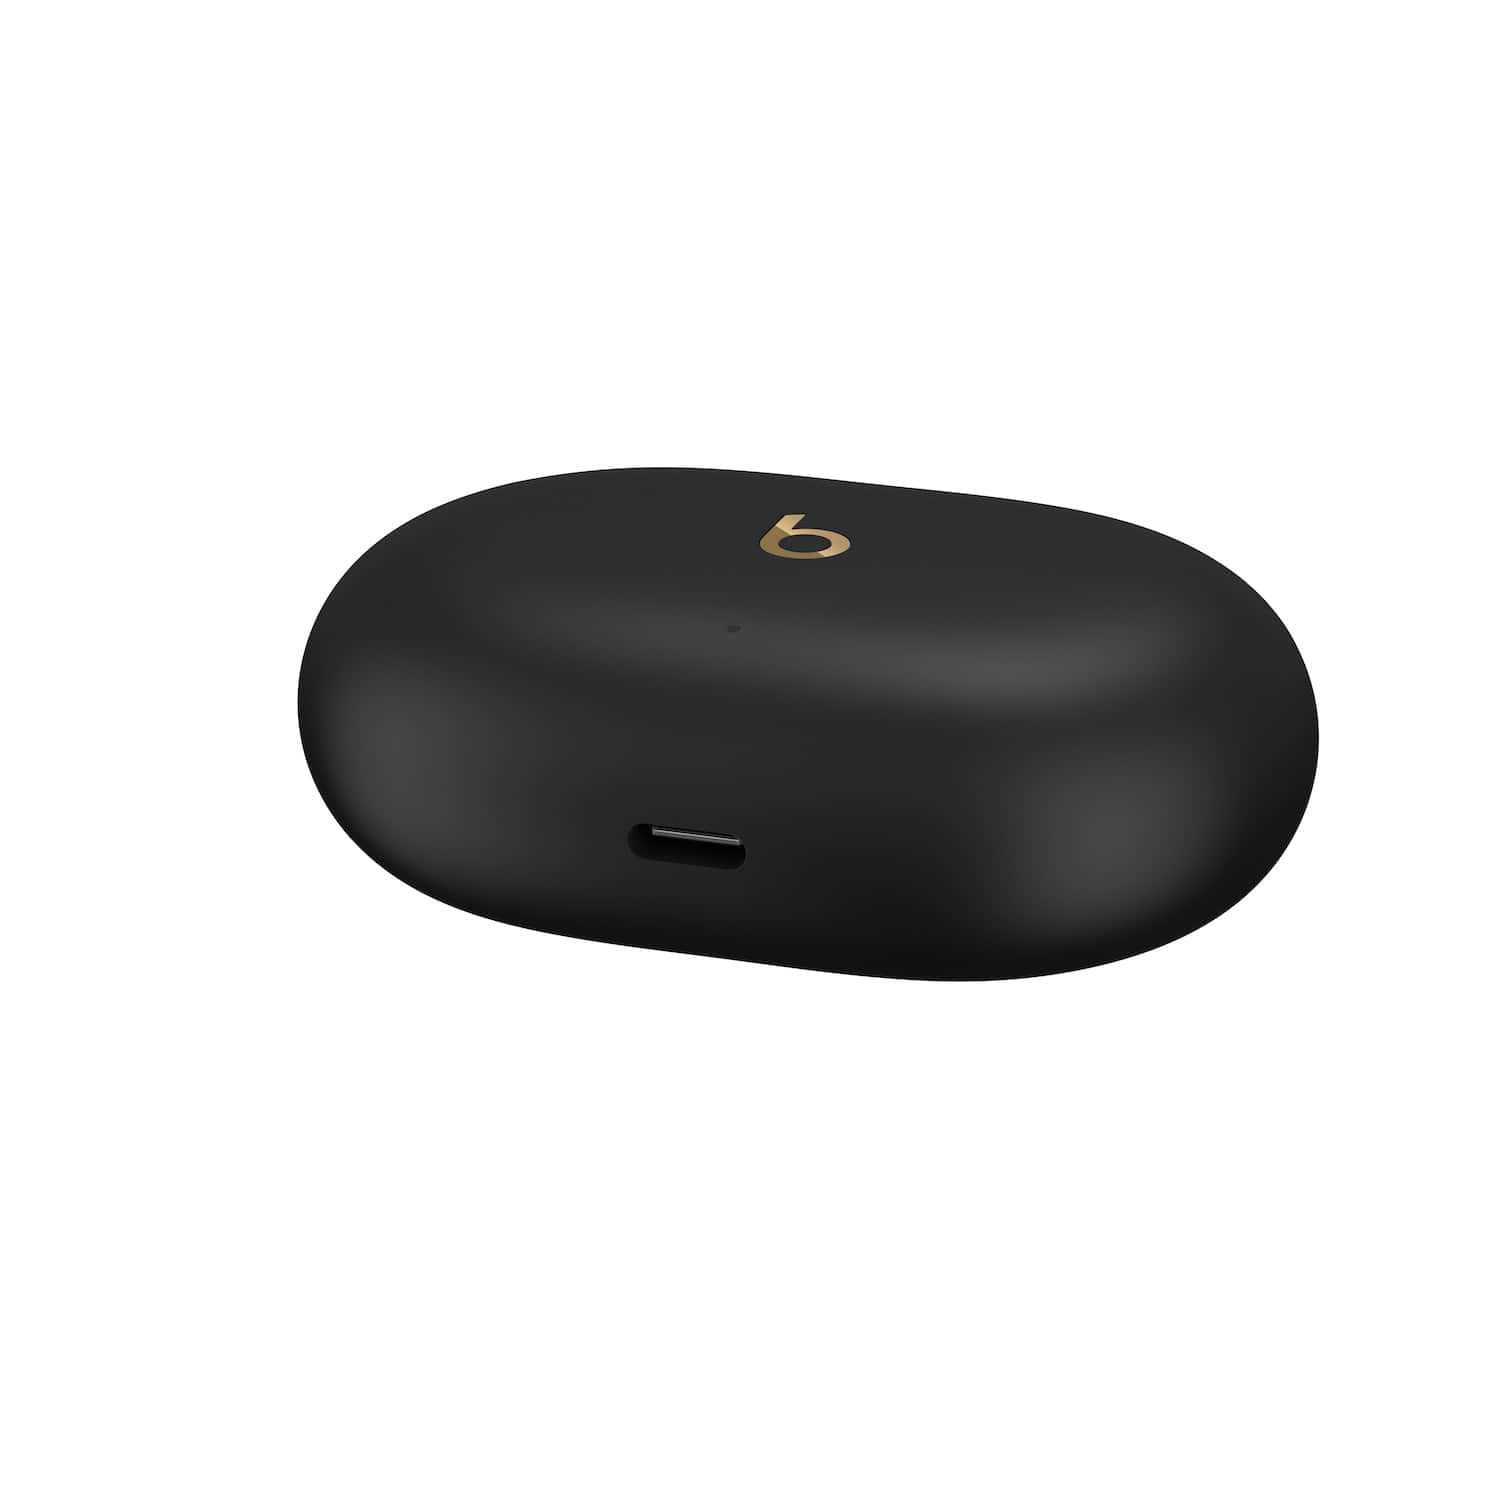 Beats Studio Buds + - True Wireless Noise Cancelling Earbuds - Black / Gold אייקון